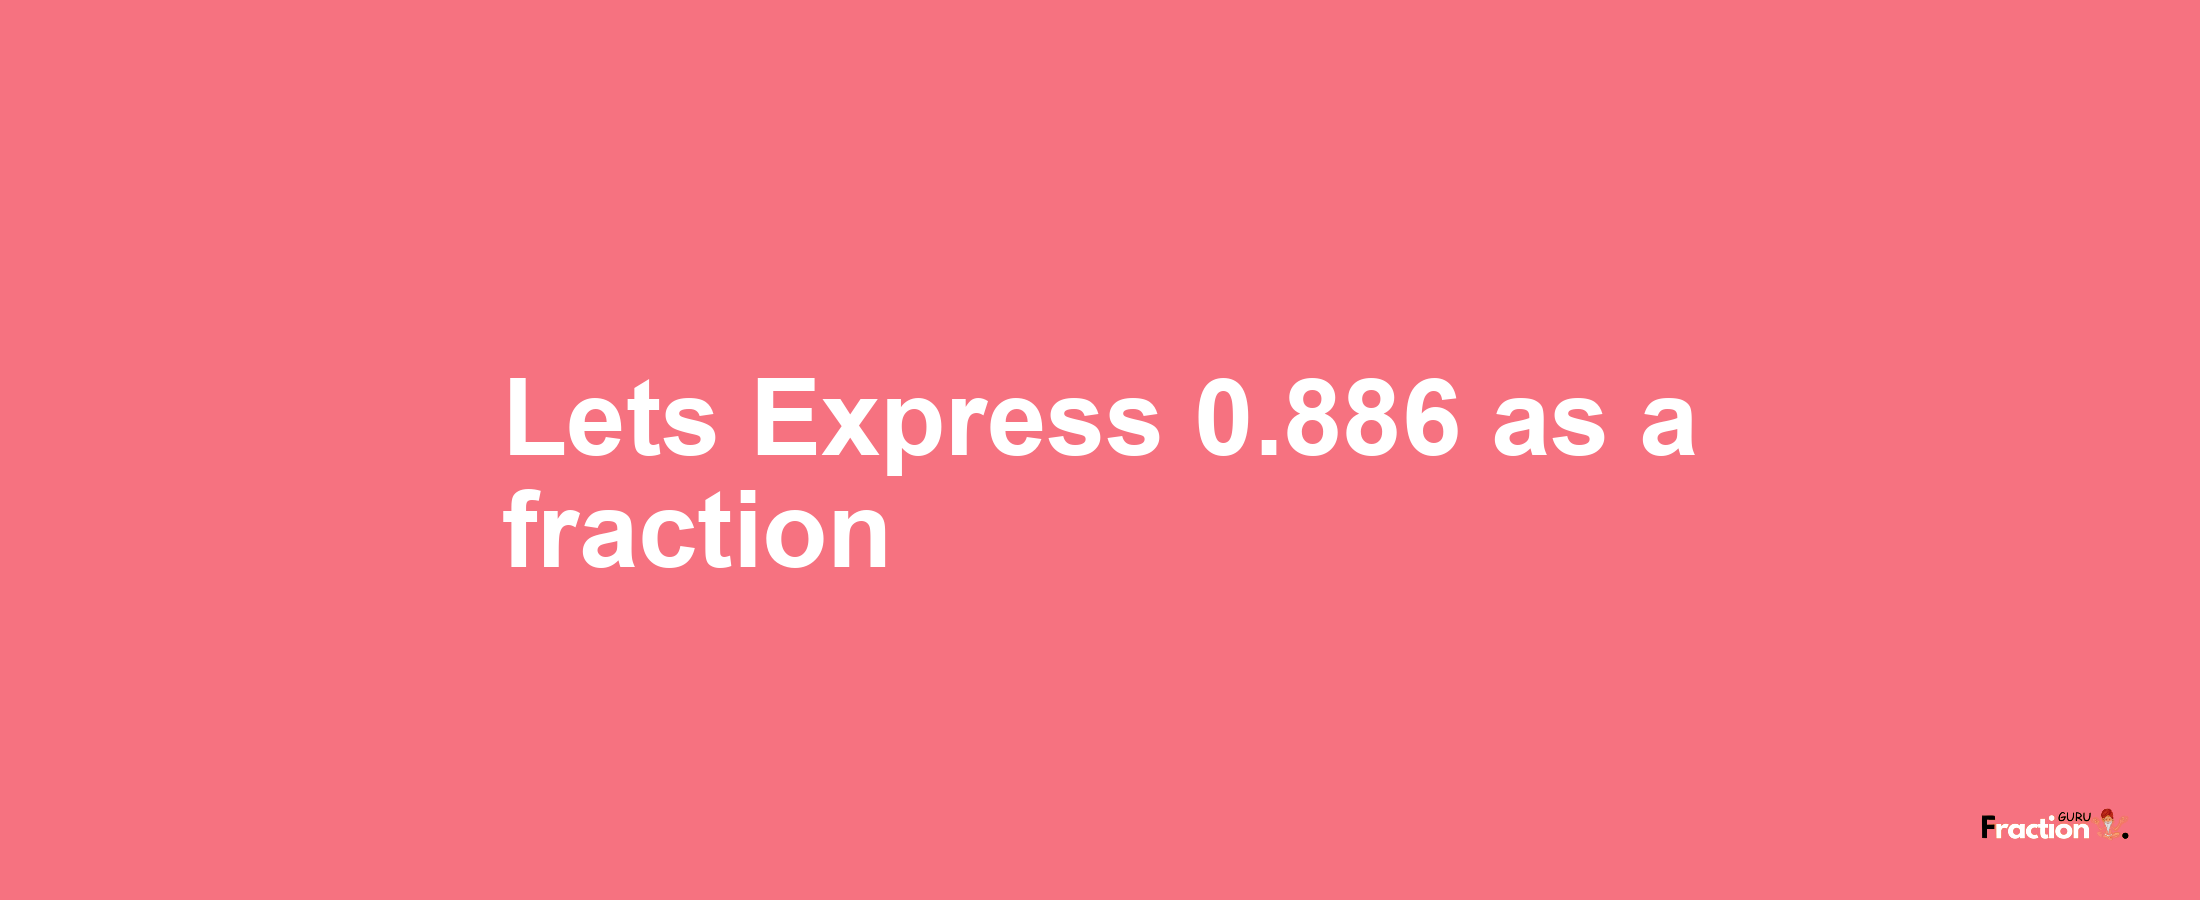 Lets Express 0.886 as afraction